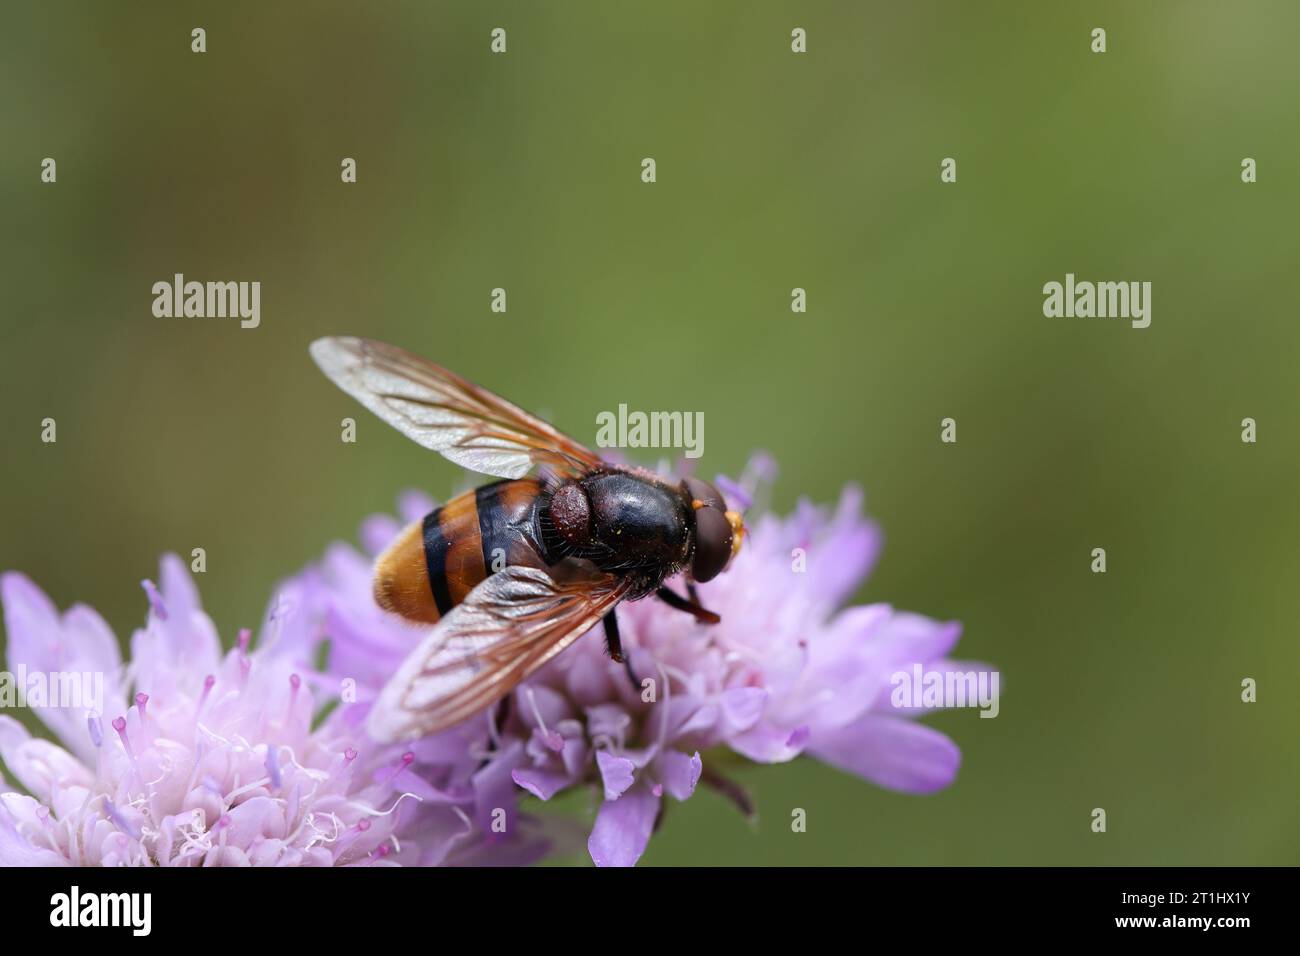 Hornet mimic hoverfly sitting on a flower pollinating it Stock Photo